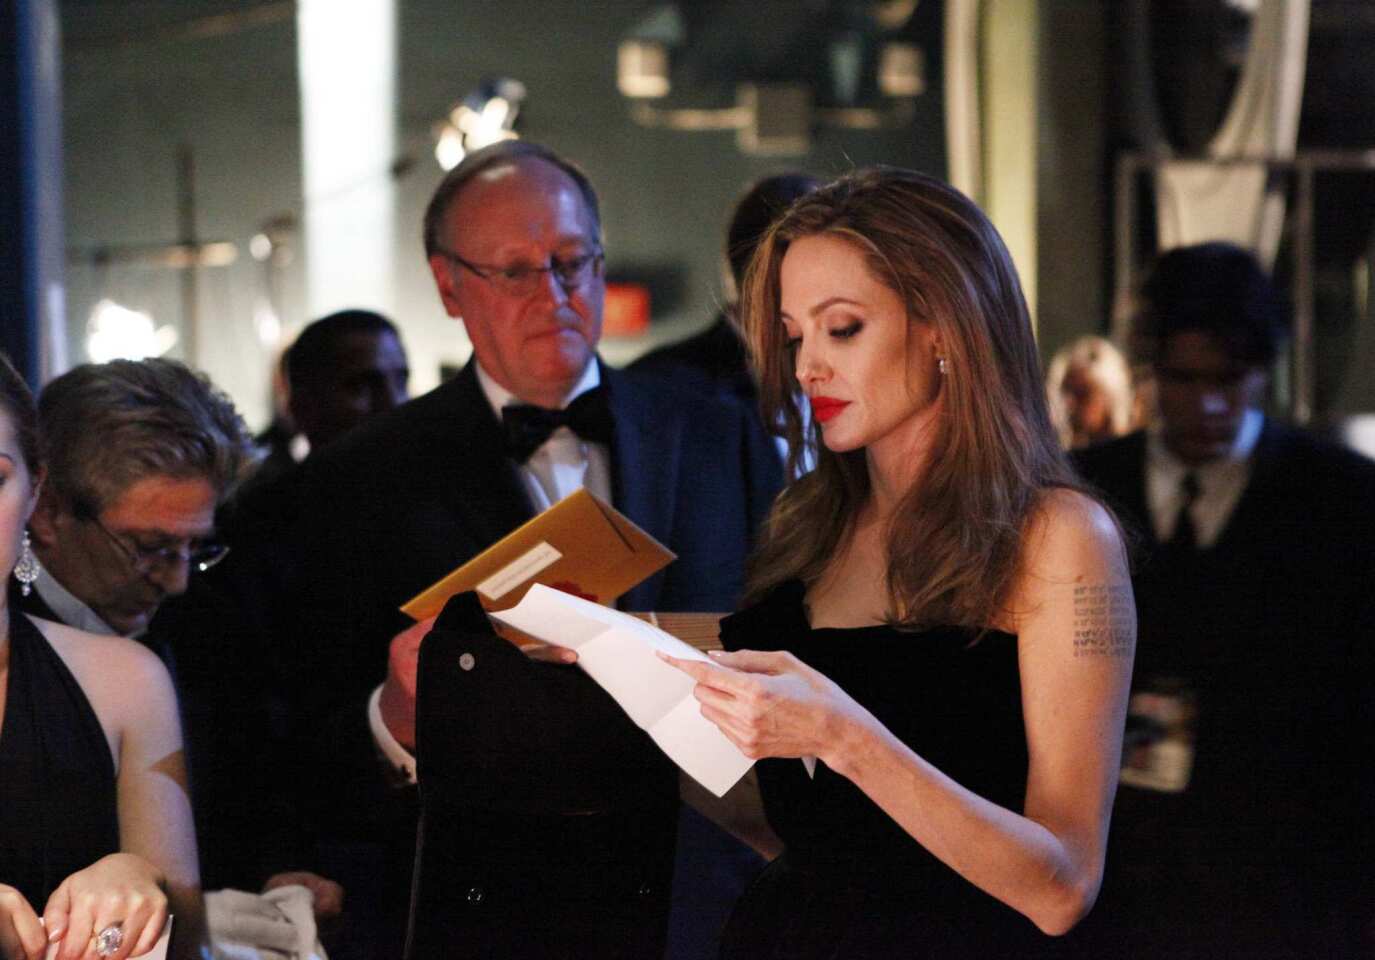 The star prepares backstage at the 2012 Academy Awards in Hollywood. Jolie presented the screenplay trophies.